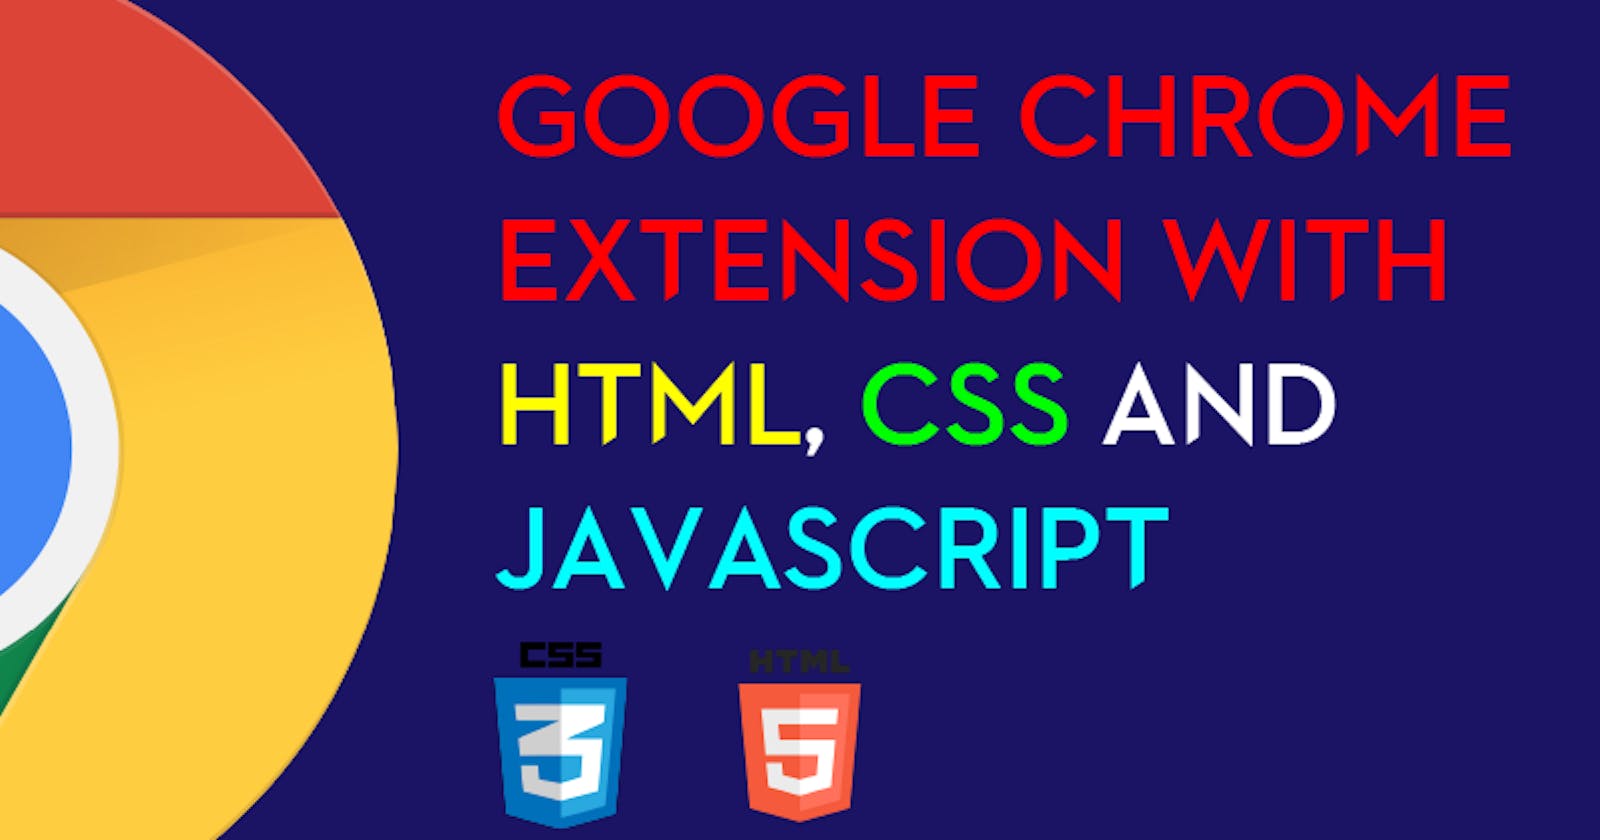 Create Chrome Extension With HTML, CSS, and JavaScript